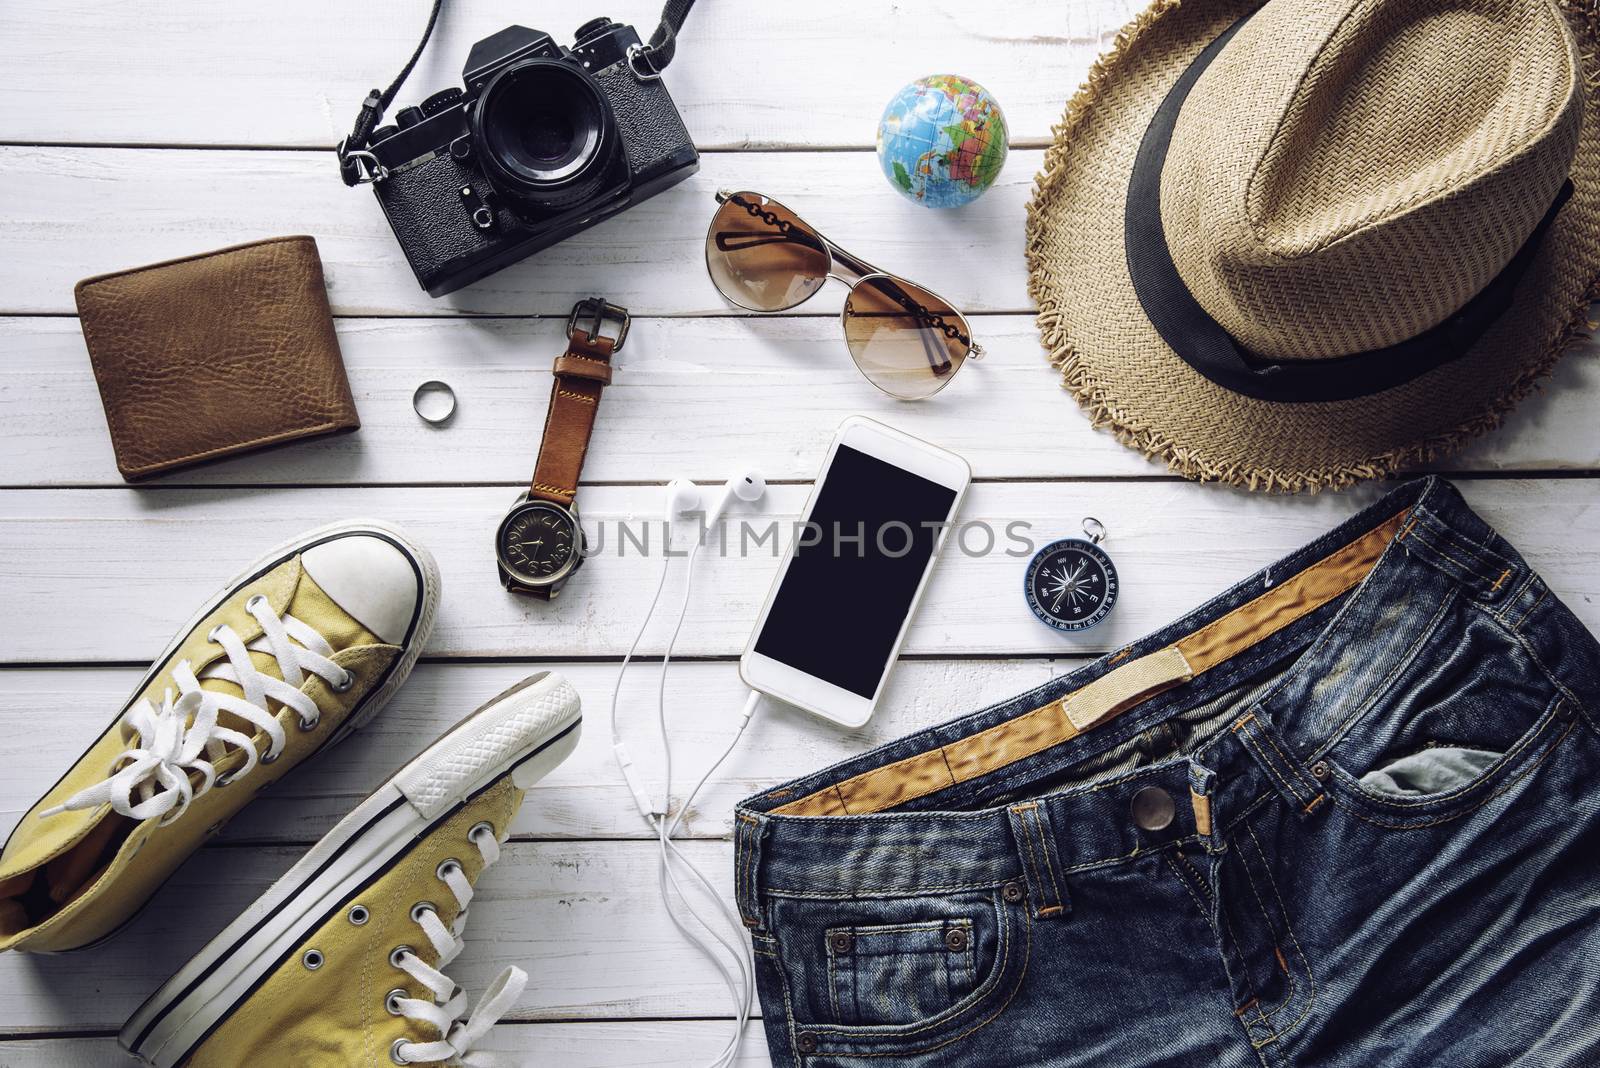 Travel accessories costumes. Passports, luggage, The cost of travel maps prepared for the trip, on white wooden floor